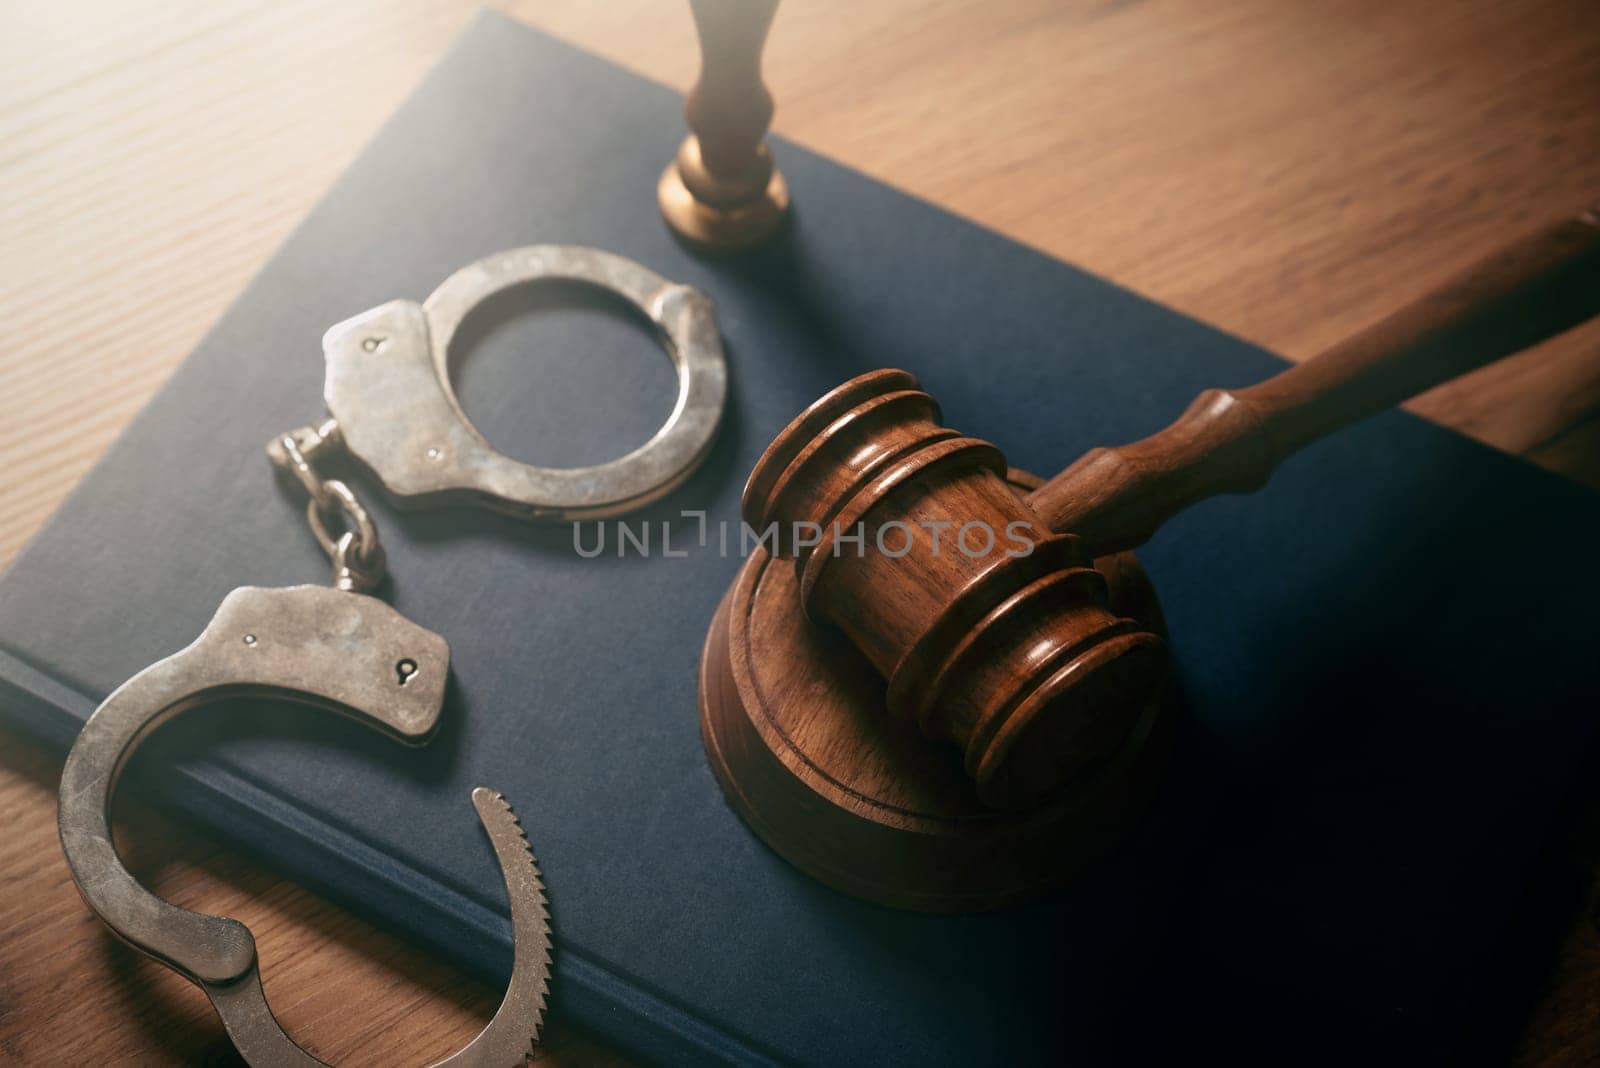 Handcuffs and wooden gavel. Crime, legal and violence concept.